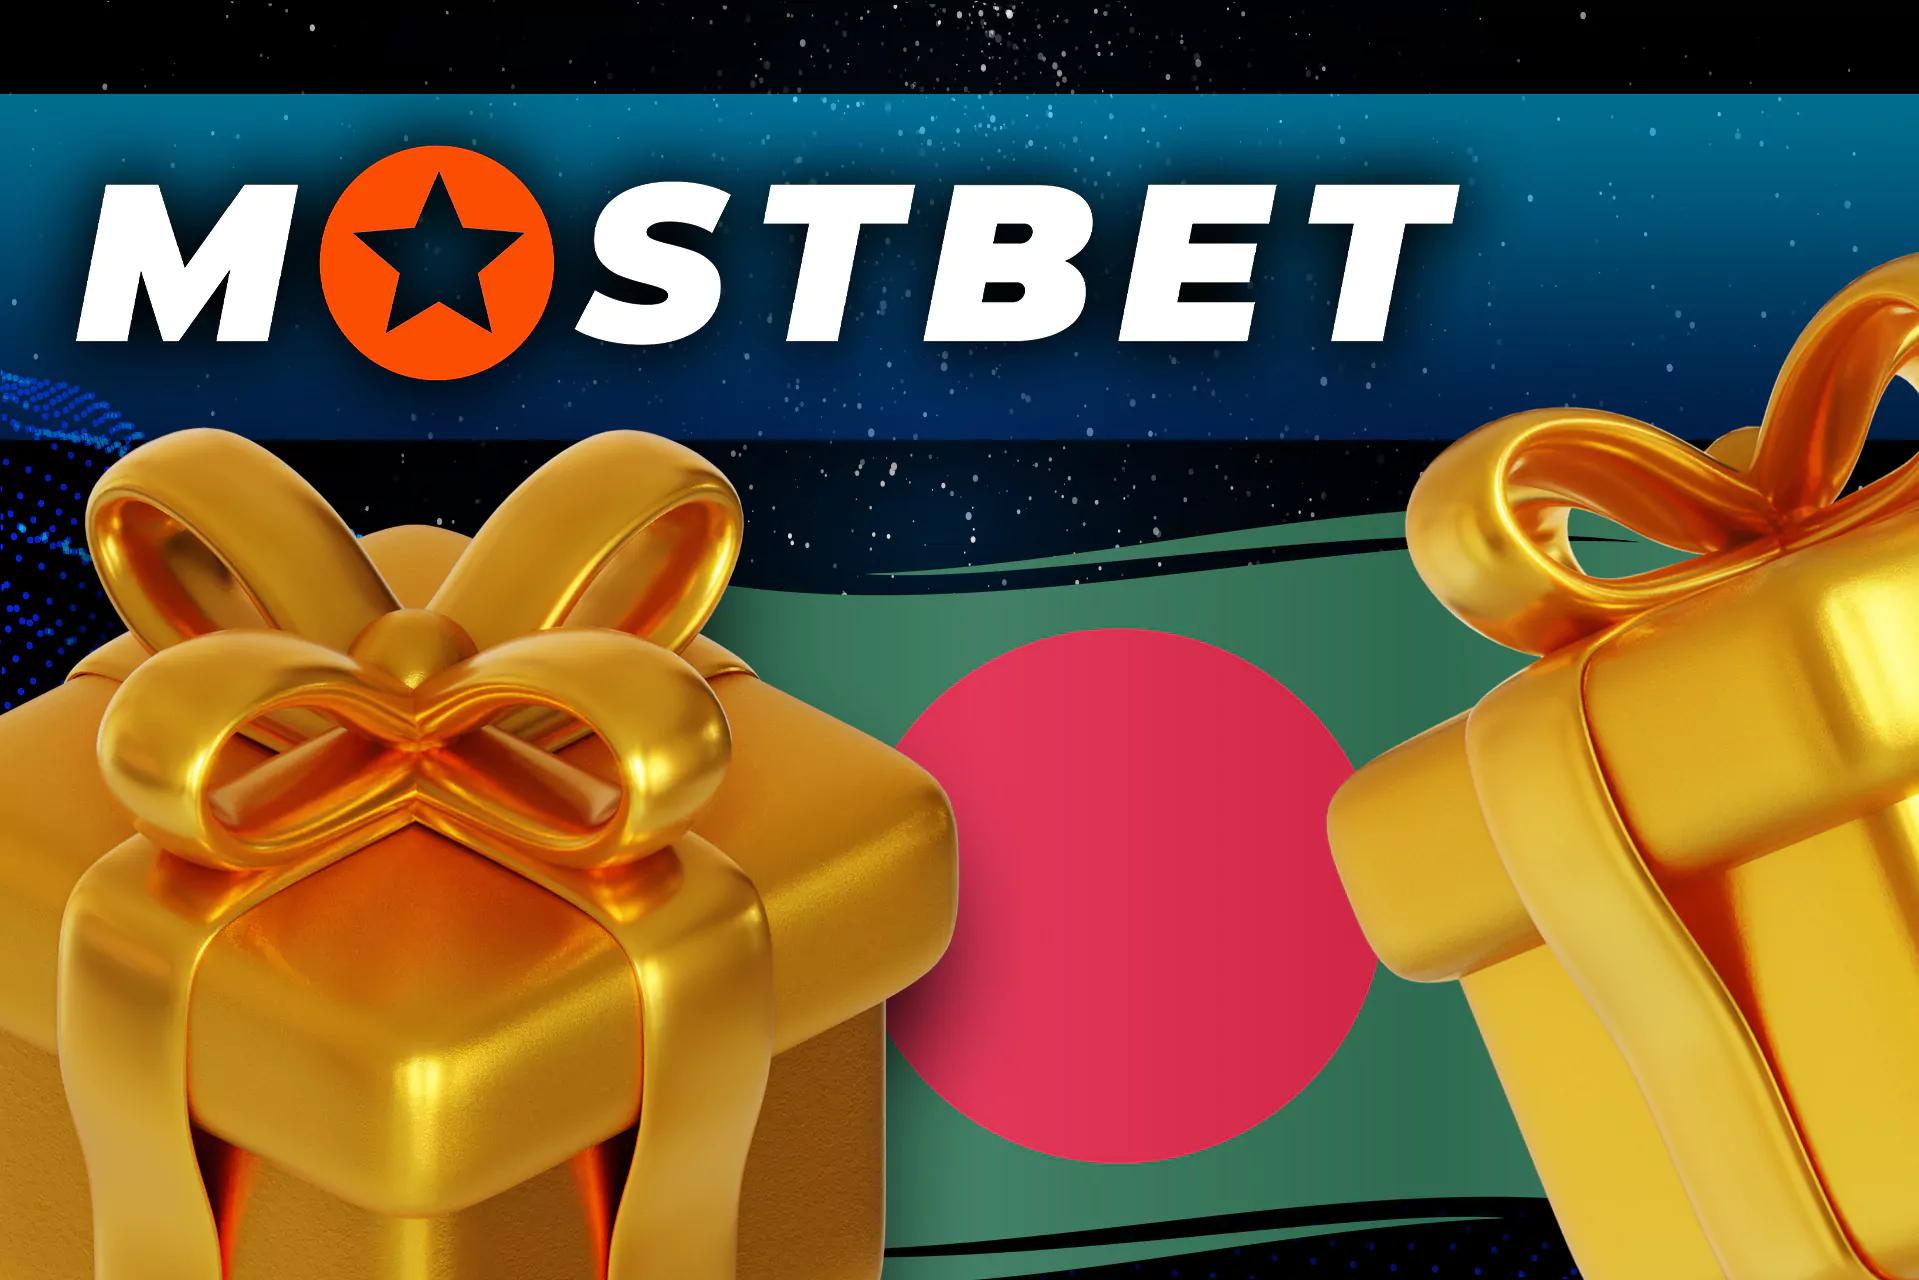 Bonuses and gifts from Mostbet to Bangladeshi users.